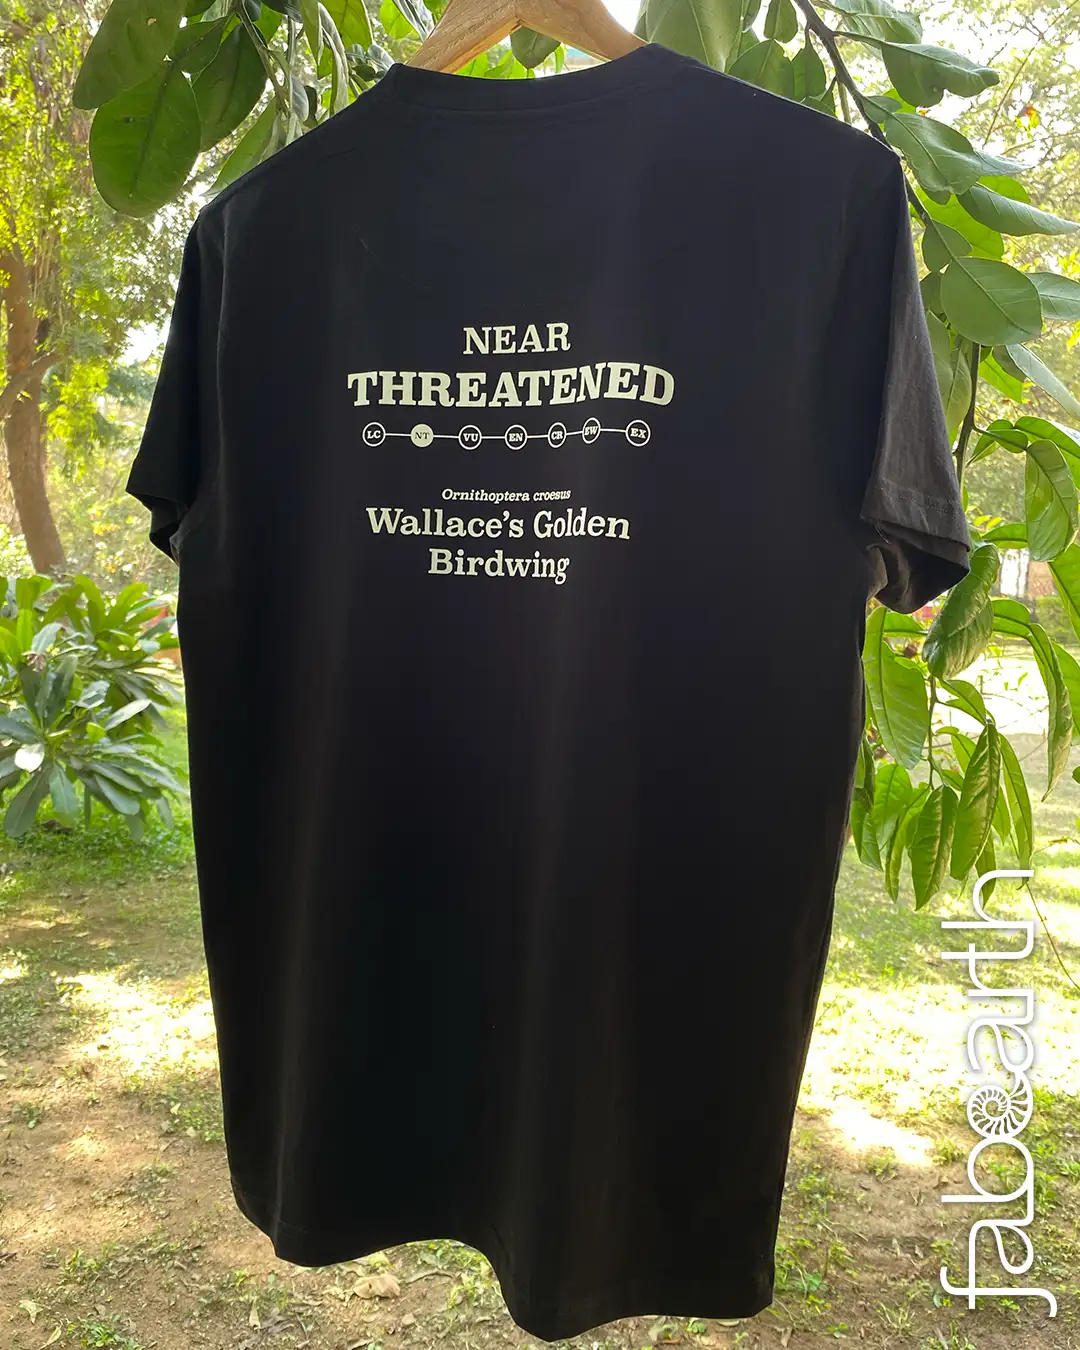 Wallace's Golden Birdwing Tee back by Fabearth